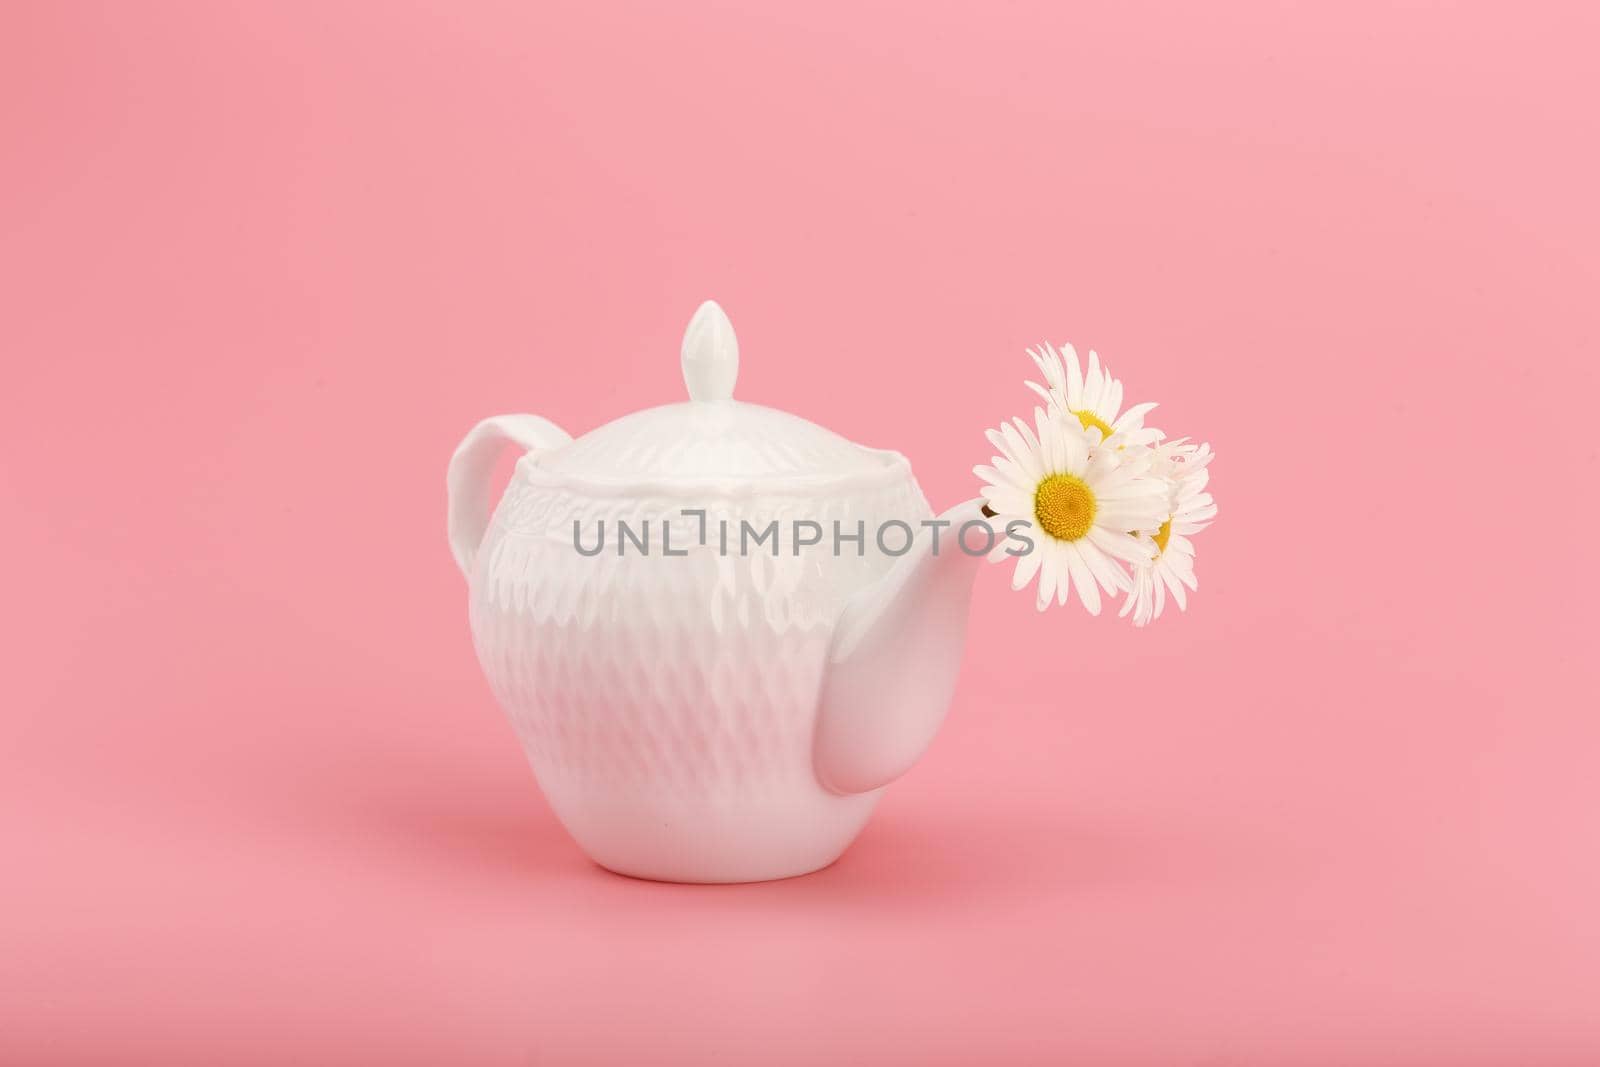 Minimalistic still life with white porcelain tea pot with camomile flowers against pink background. Concept of herbal tea and wellness. 